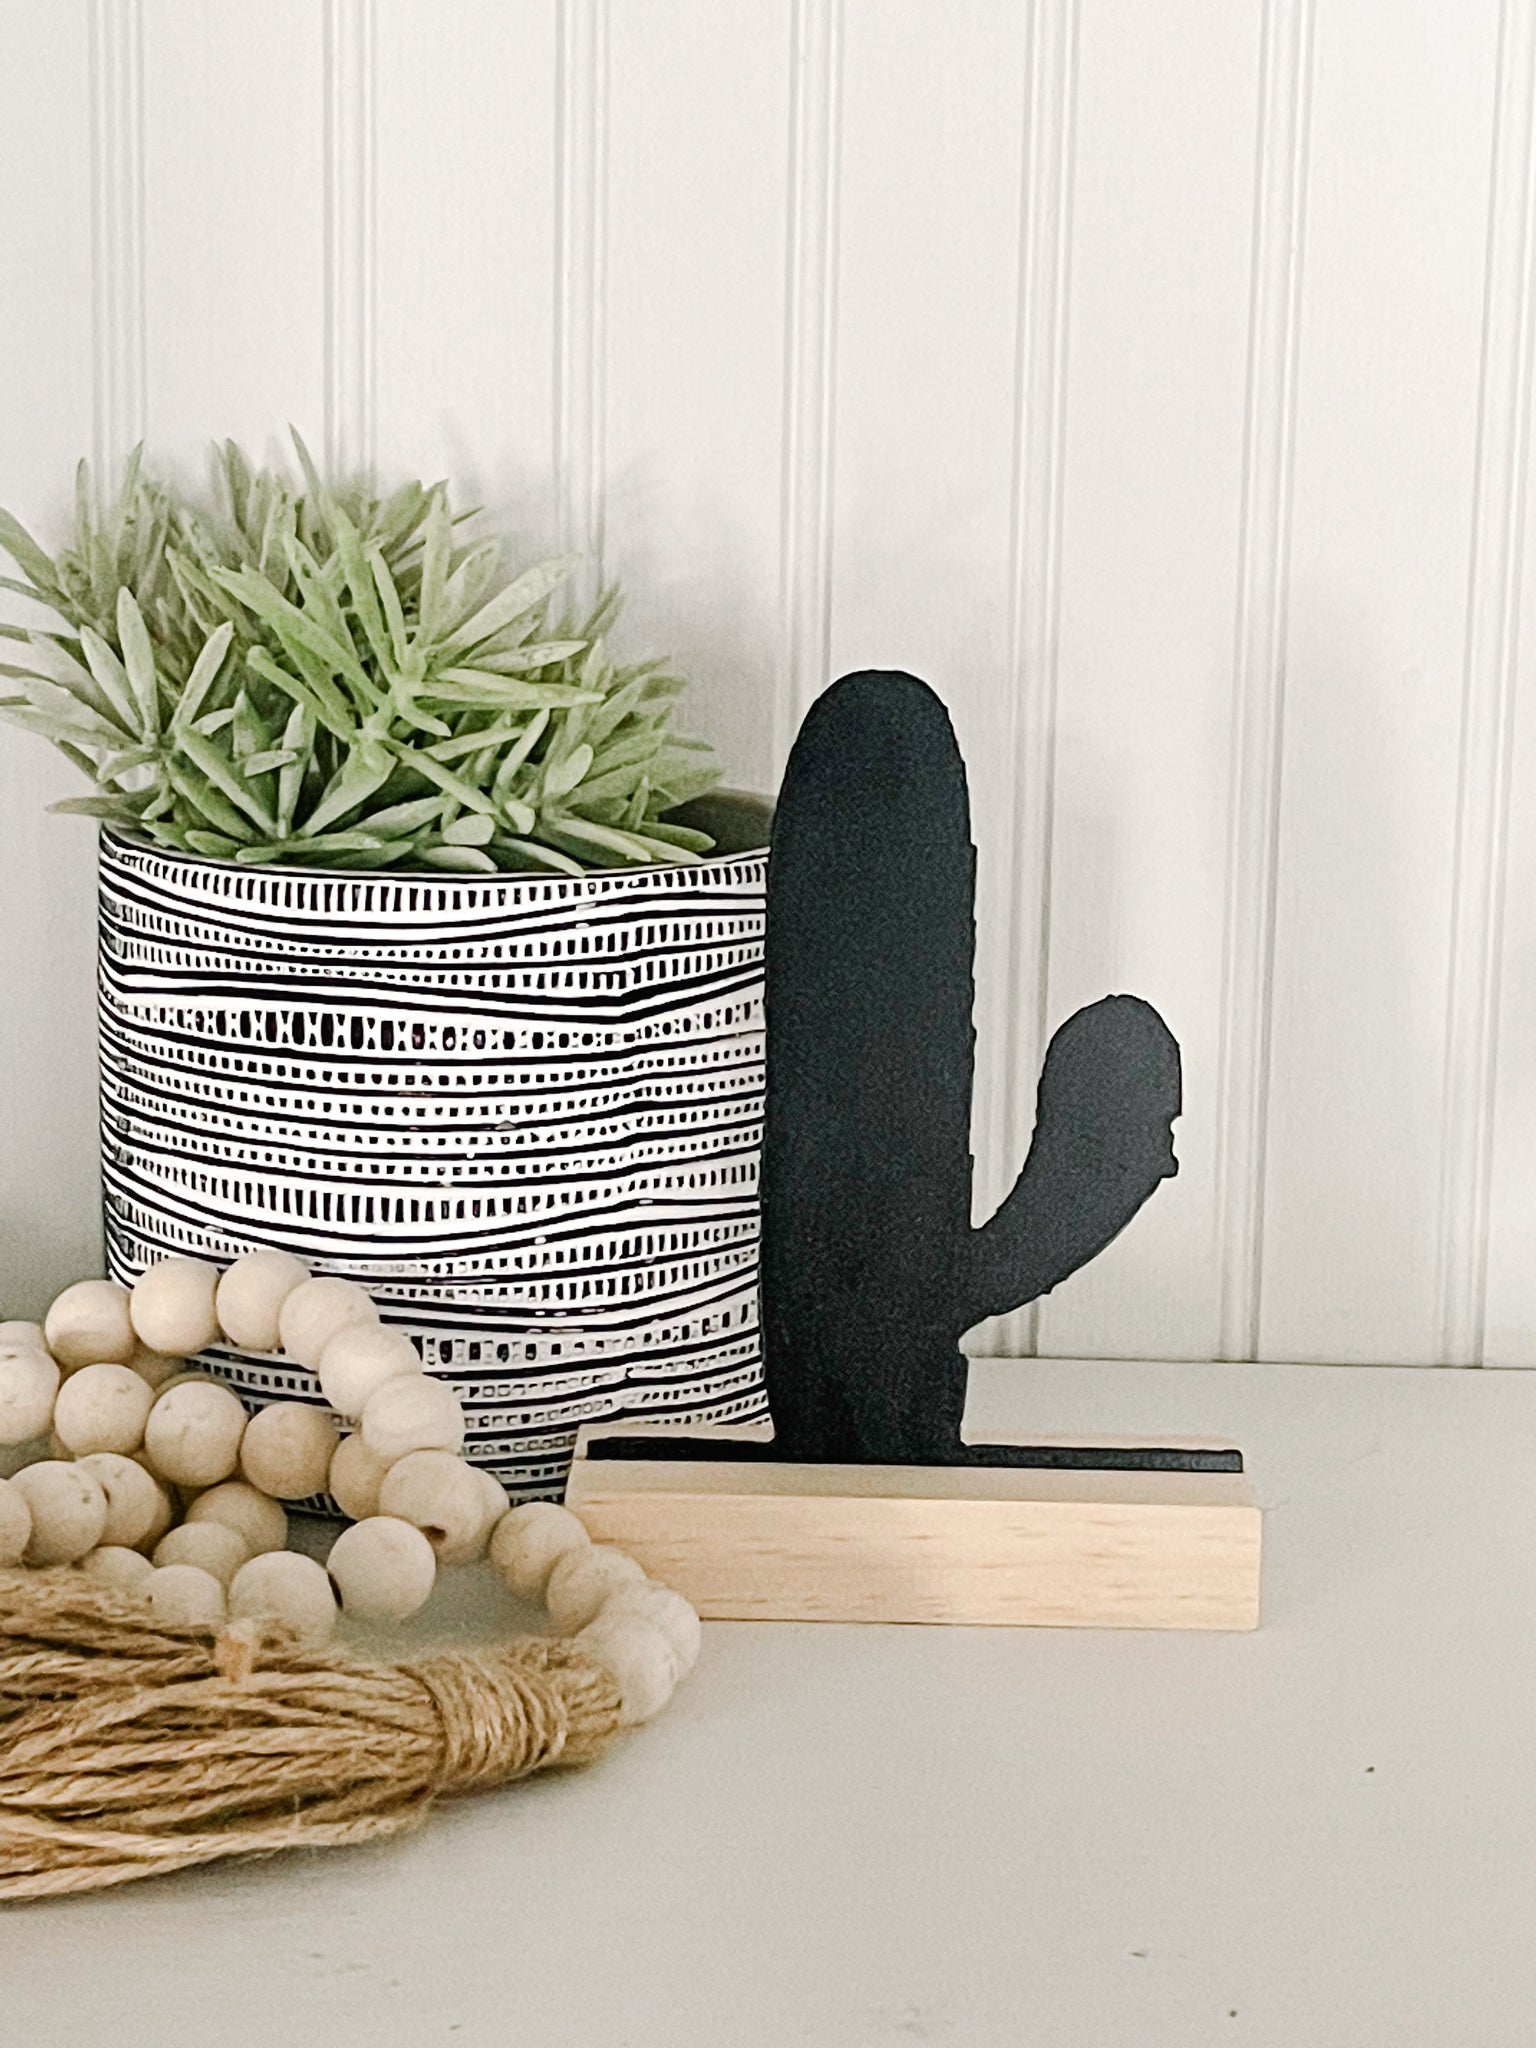 Small Cactus on Wood Stand